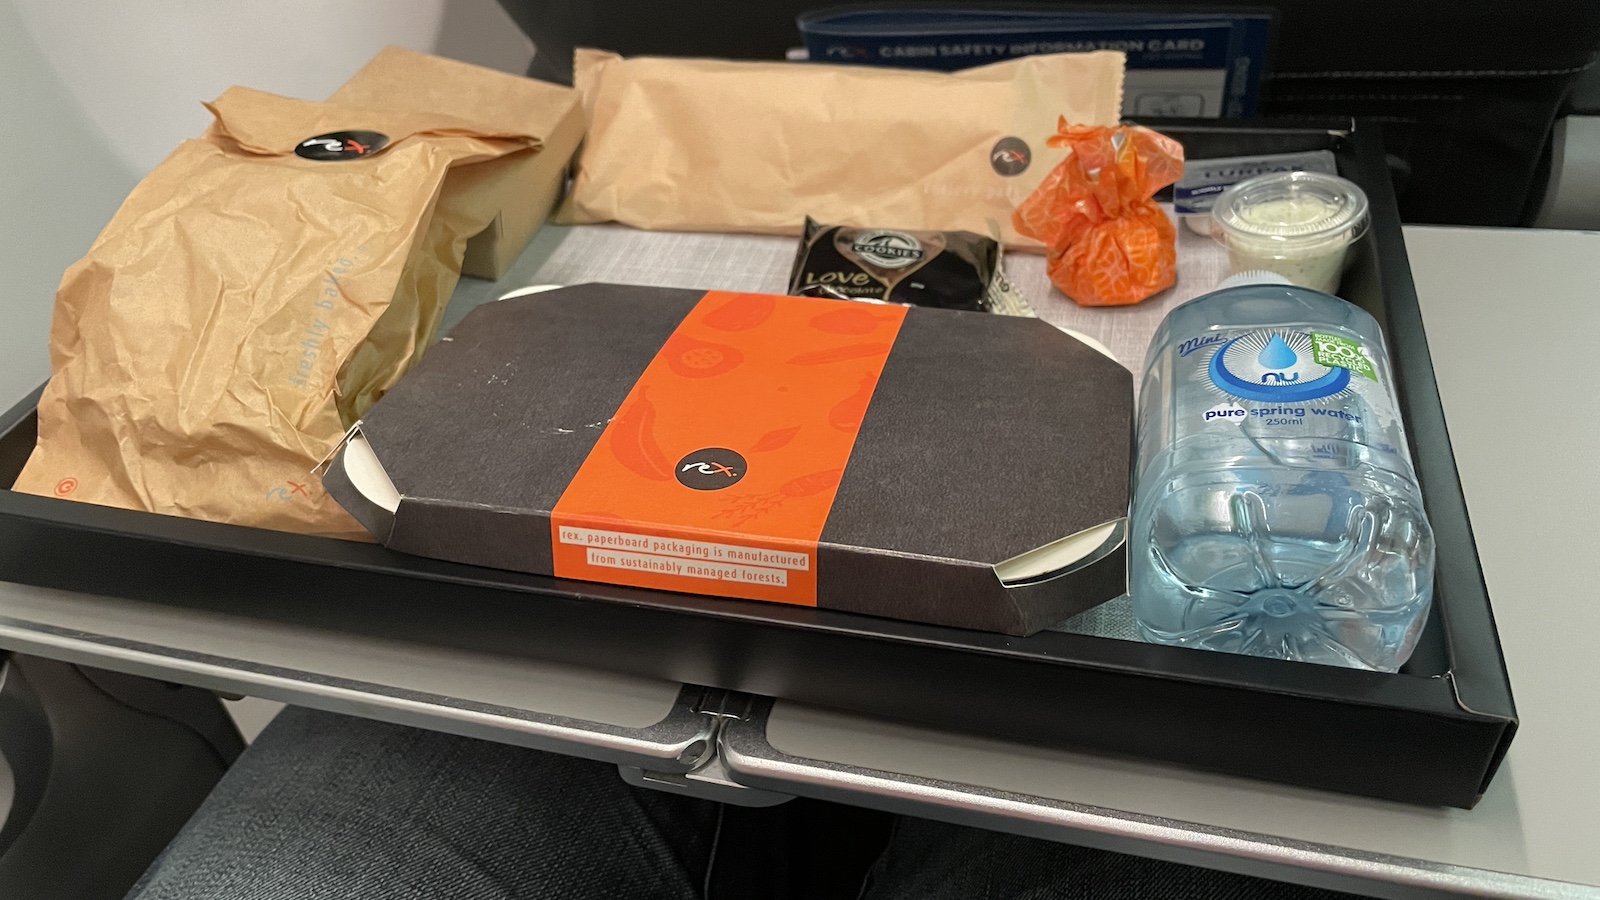 Rex Airlines Brisbane to Sydney Business Class Meal Paper Wrapped Point Hacks